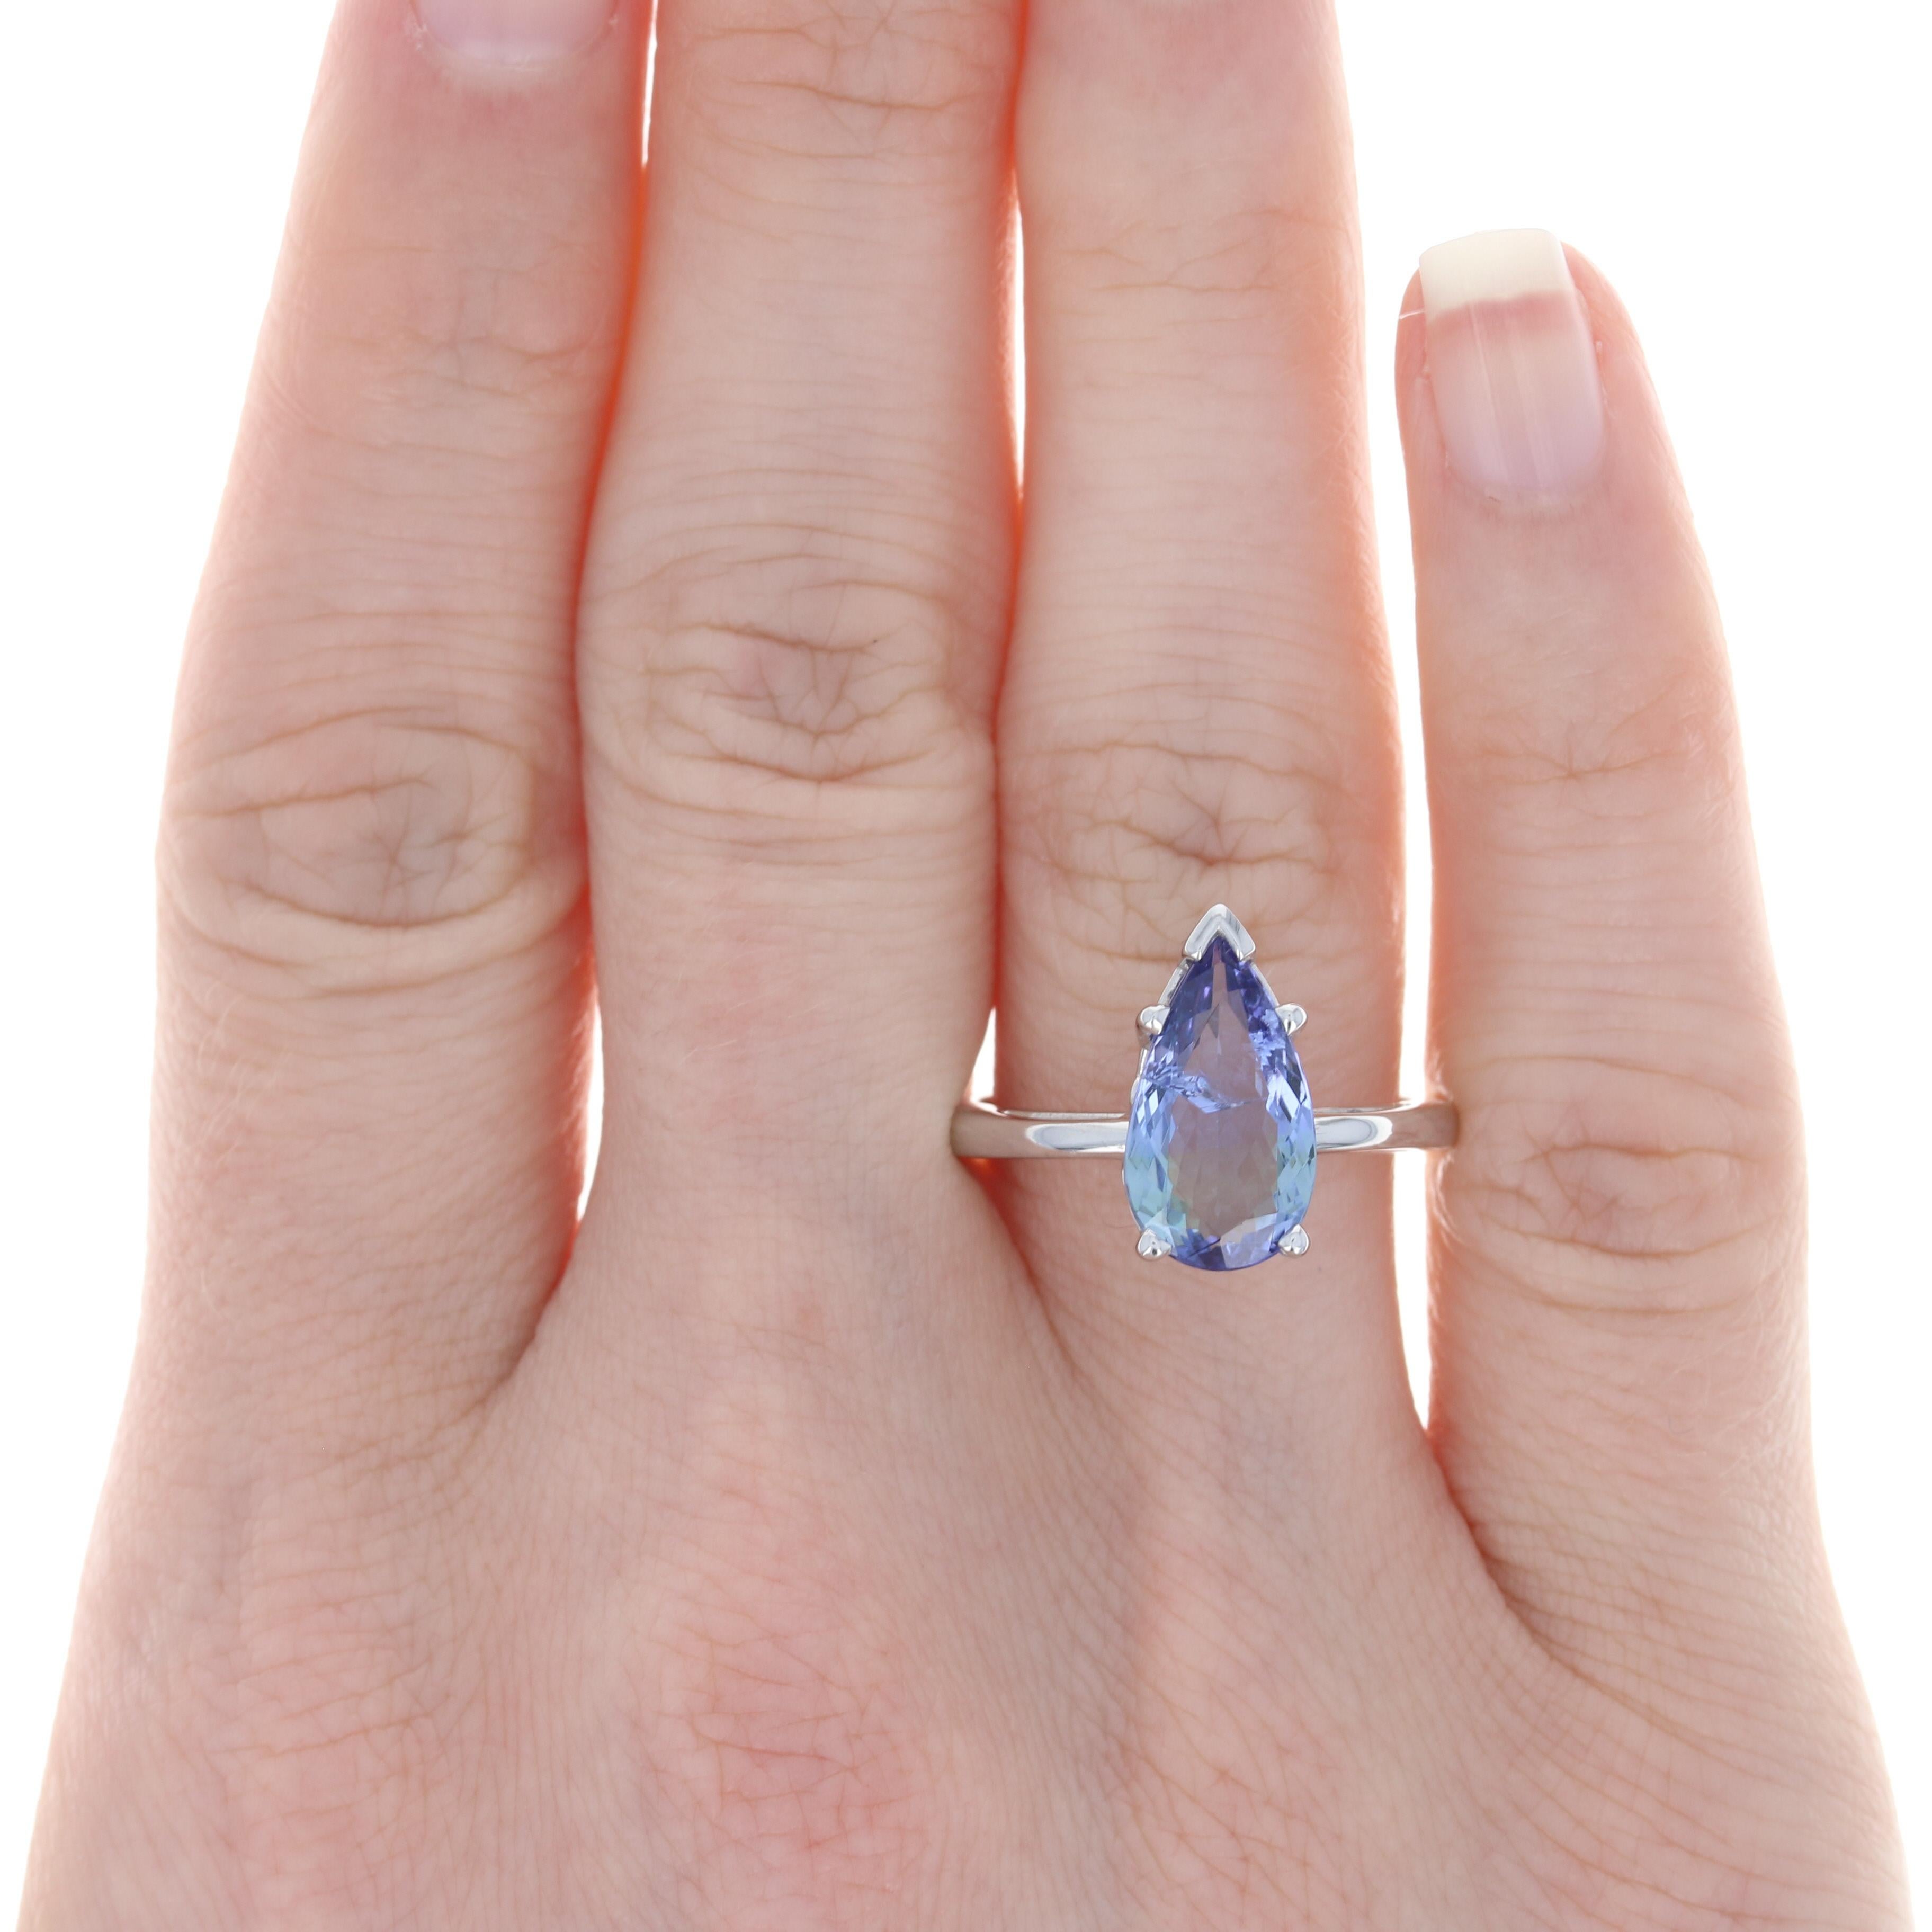 This year give your special someone a gift that she will treasure forever! Fashioned in popular 14k white gold, this NEW ring features a glorious natural tanzanite. Tanzanites, which also star as the birthstone for the month of December, were